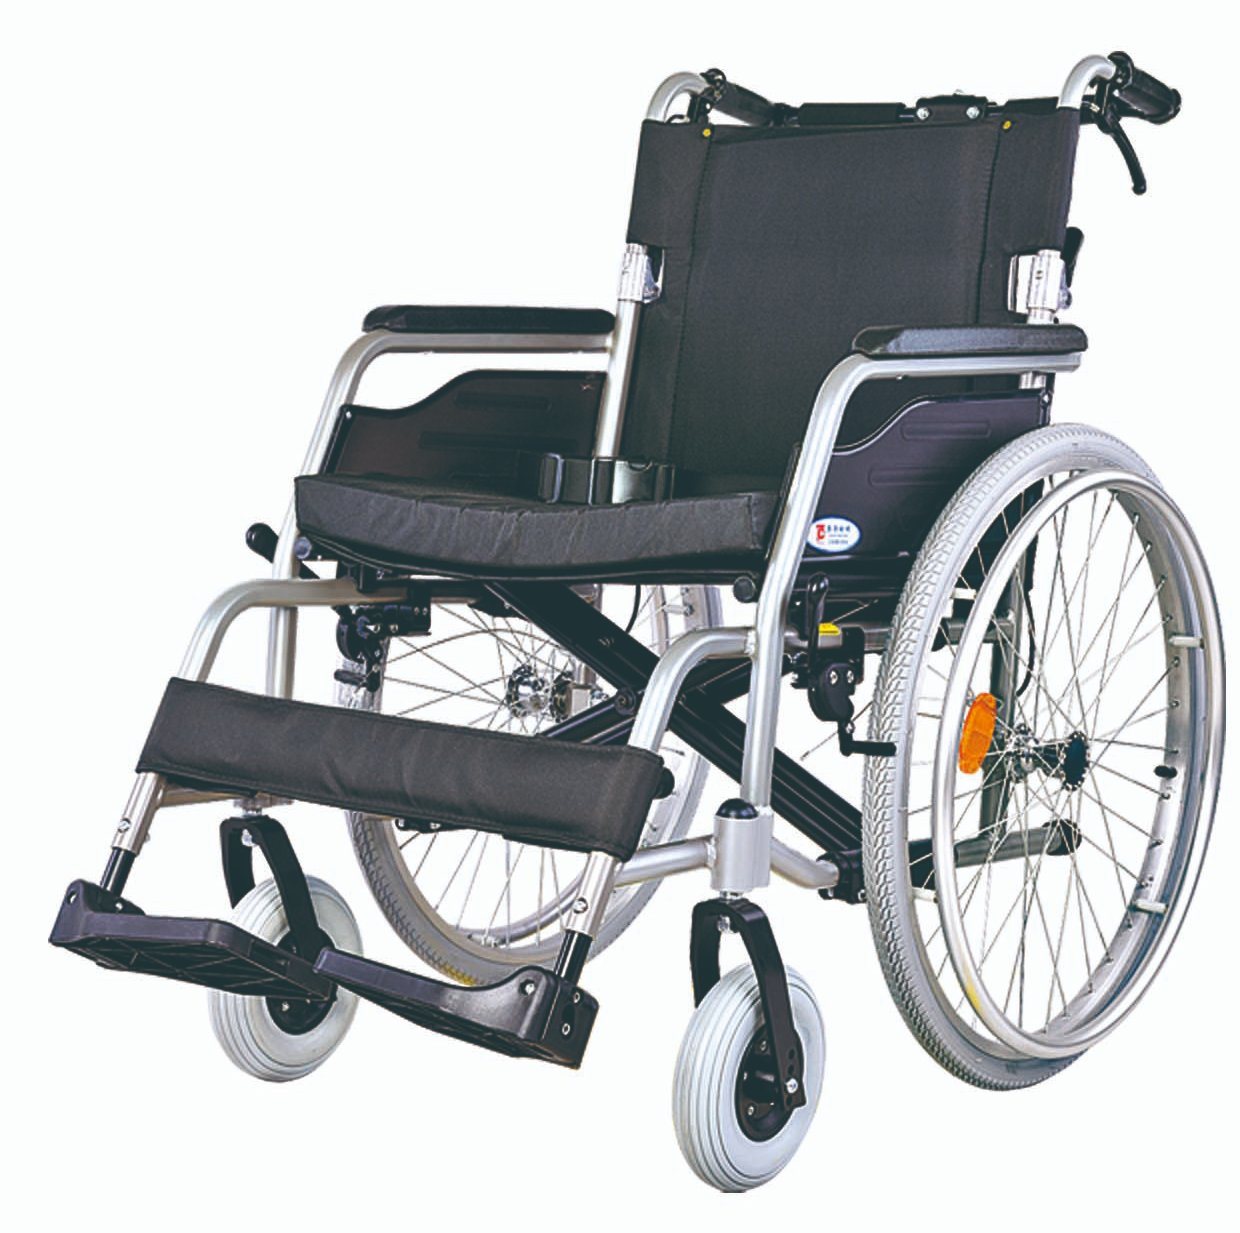 How to choose a wheelchair?